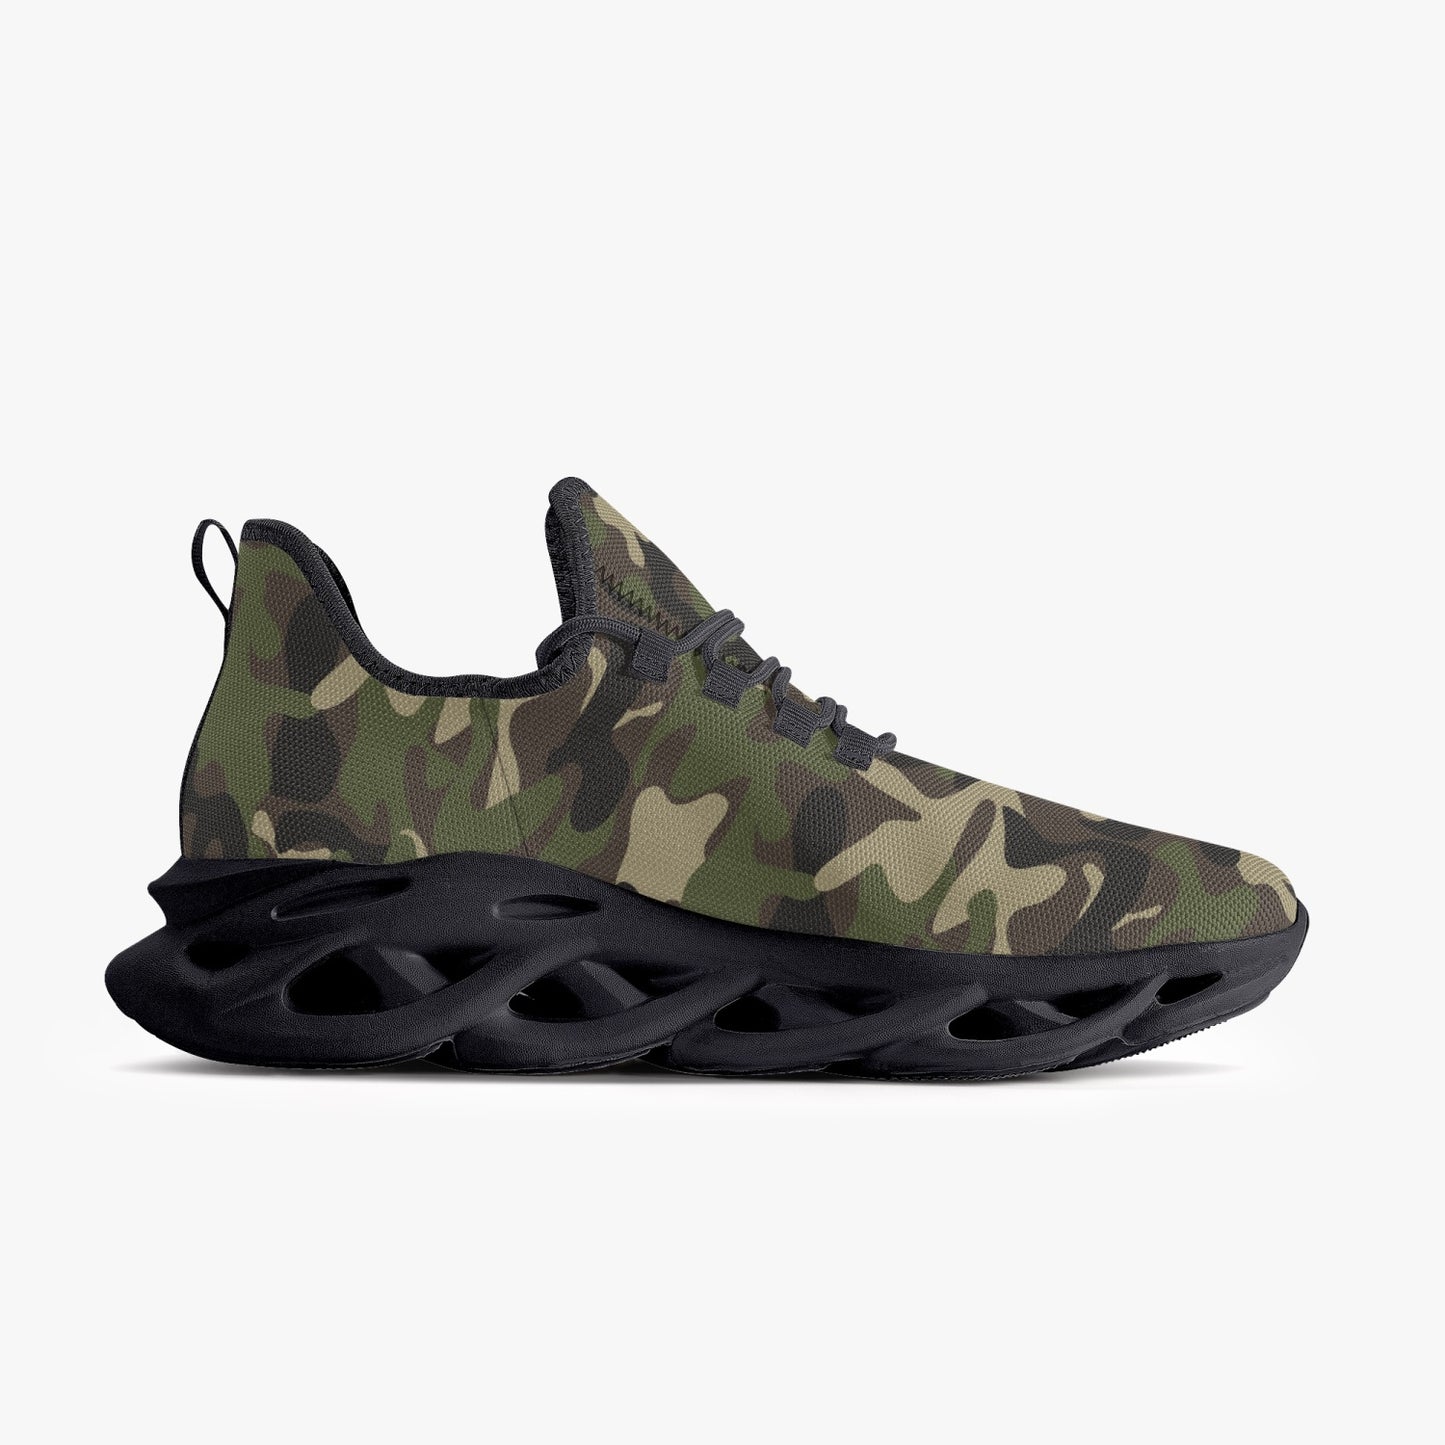 Camo Sneakers, Green Army Camouflage Bouncing Mesh Men Women Knit Running Athletic Sport Workout Breathable Lace Up Fitness Shoes Trainers Starcove Fashion